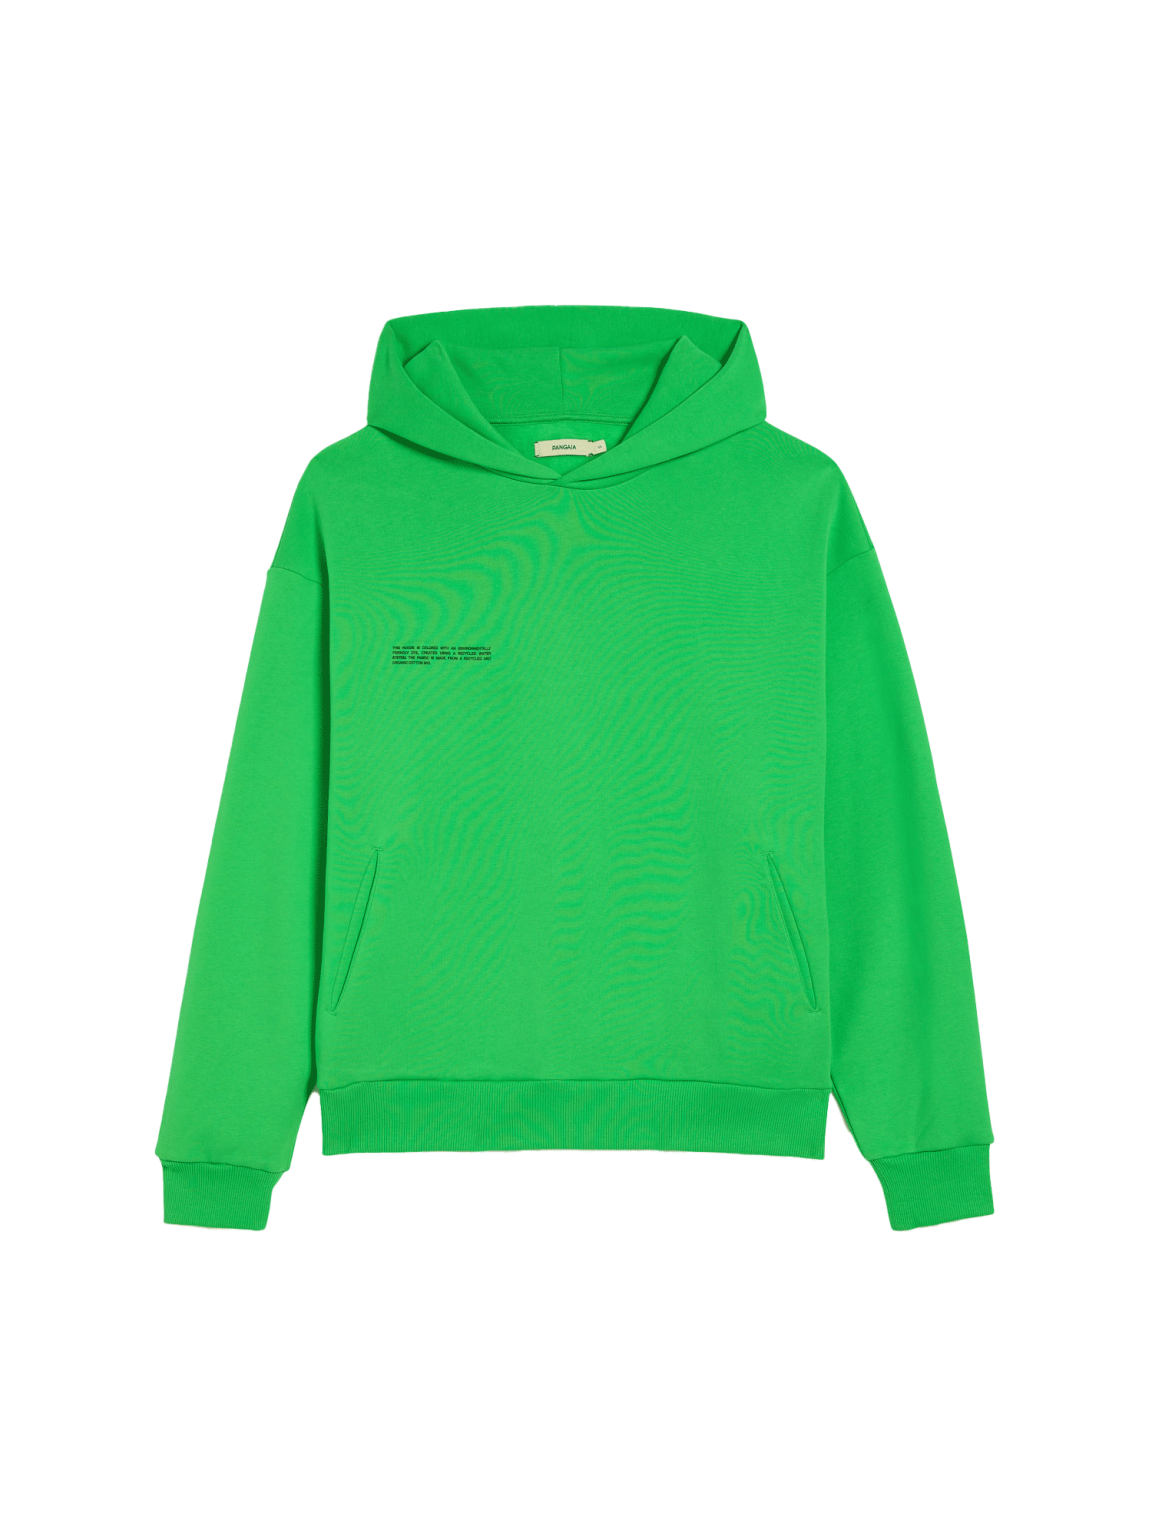 Emerald Green Hoodie Jacket without Zipper Download Free Png Images